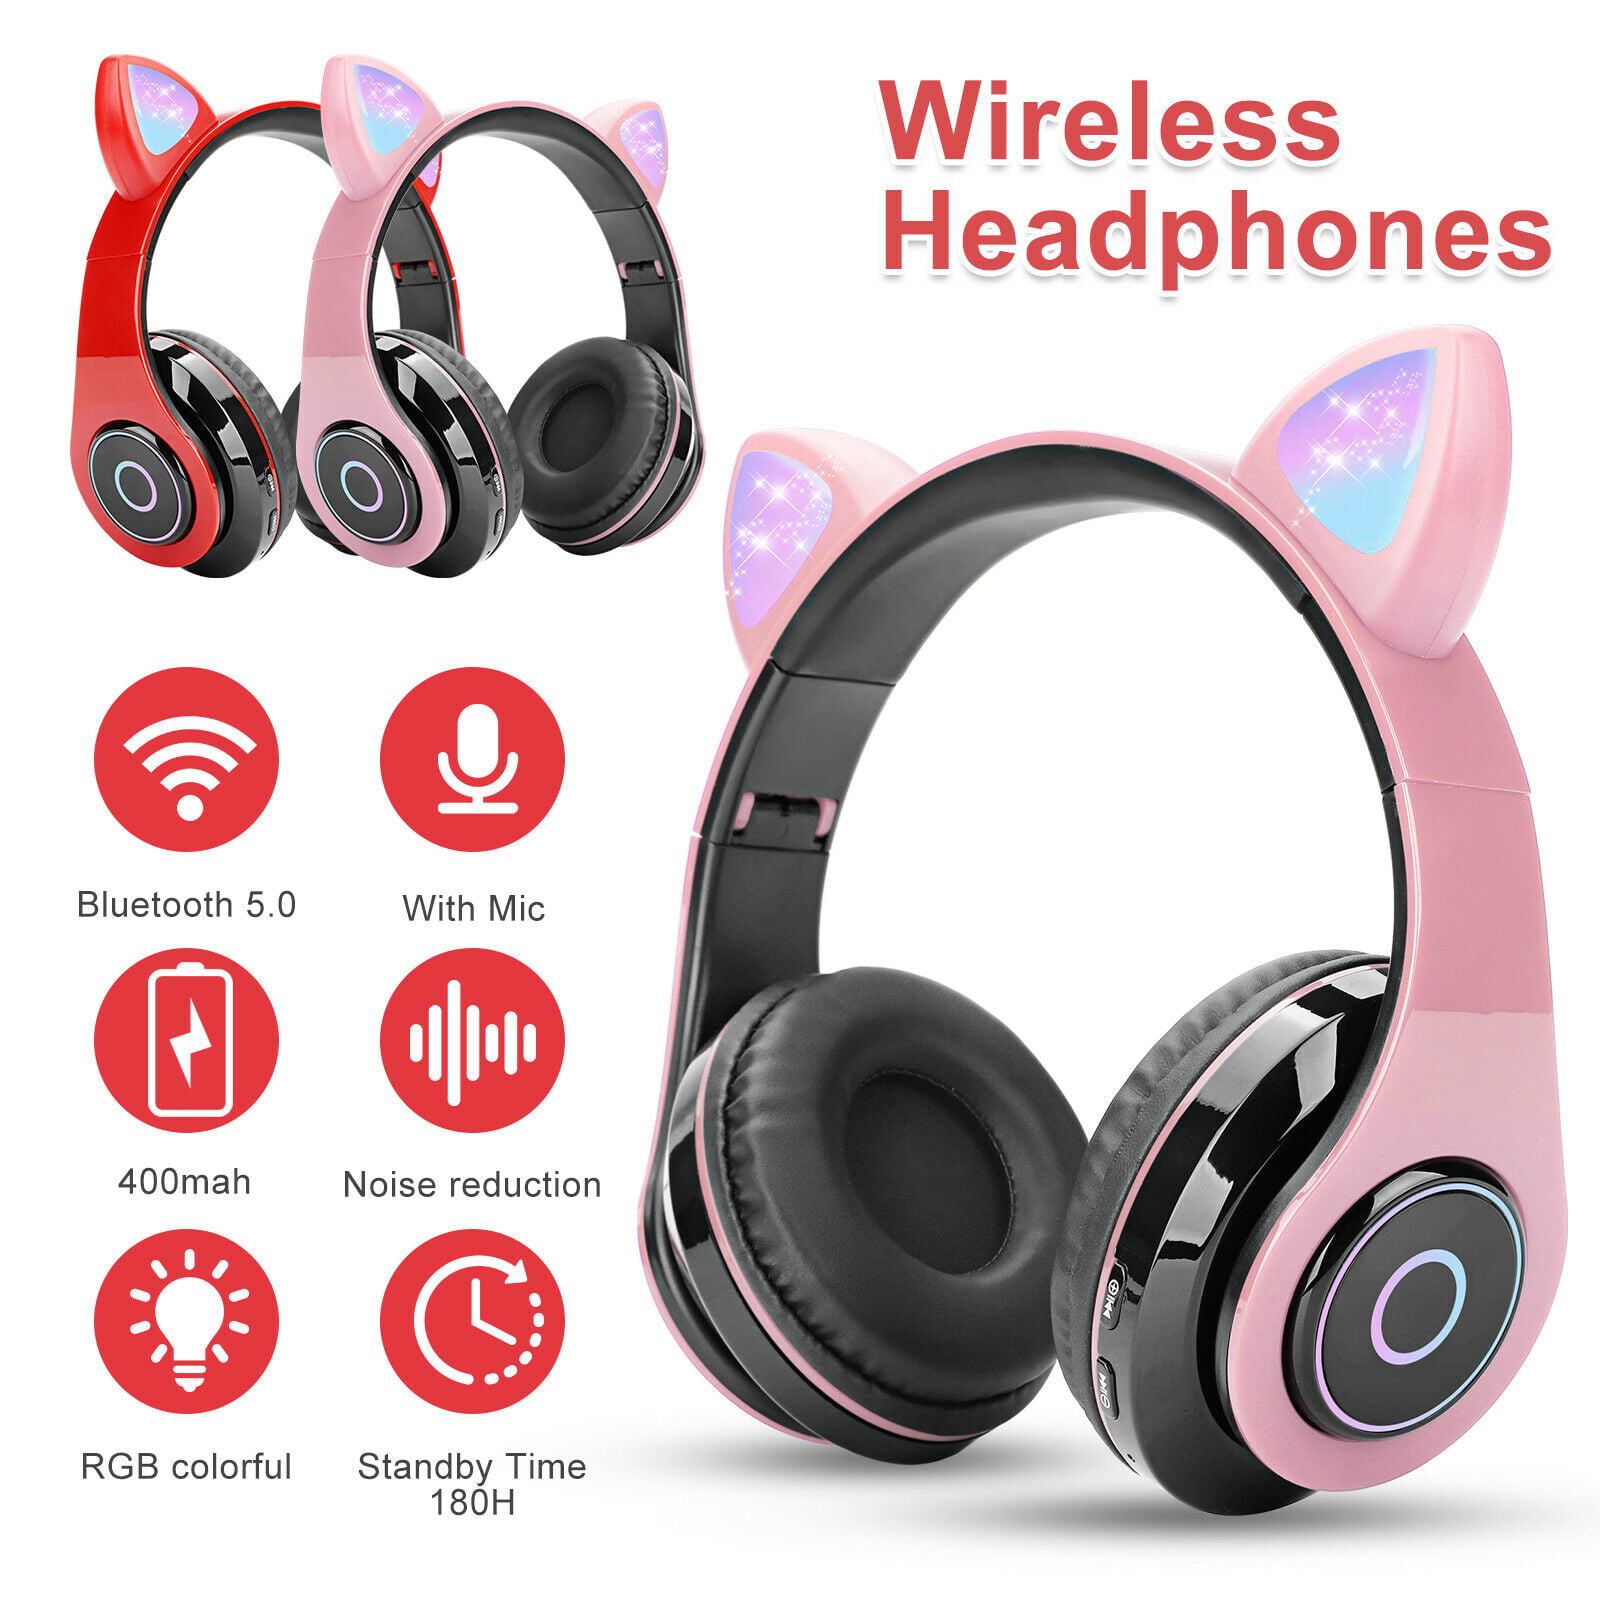 Rabbit Headband Stereo Headphones Microphone Portable Wired Headset for Kids Girls Mobile Phone iPhone Samsung Gift Black